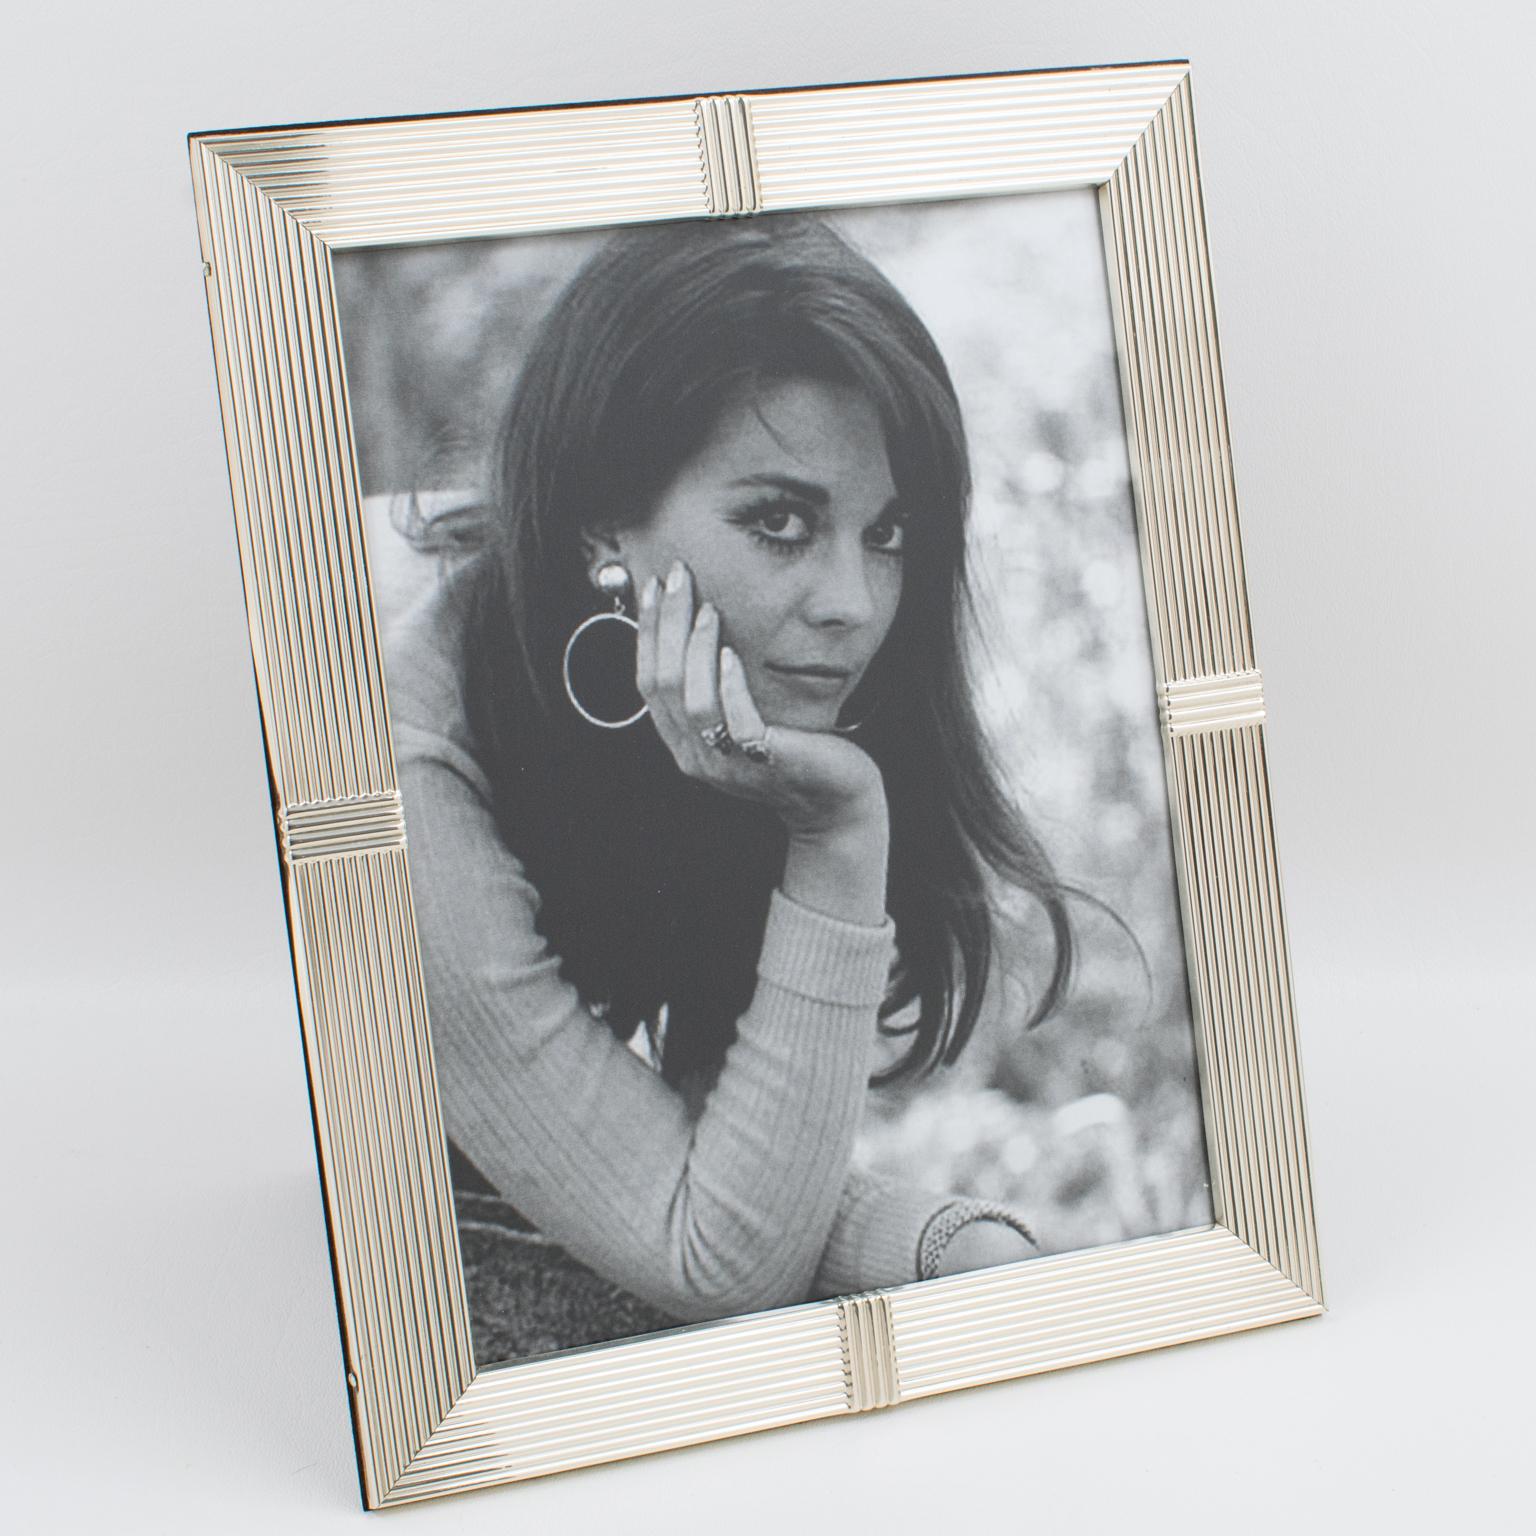 A stunning Christian Dior Paris sterling silver picture photo frame. Tall rectangular shape with striped patterns all around. The back and easel are in high gloss varnish dark wood. Marked on the edge with sterling silver legal hallmarks and a